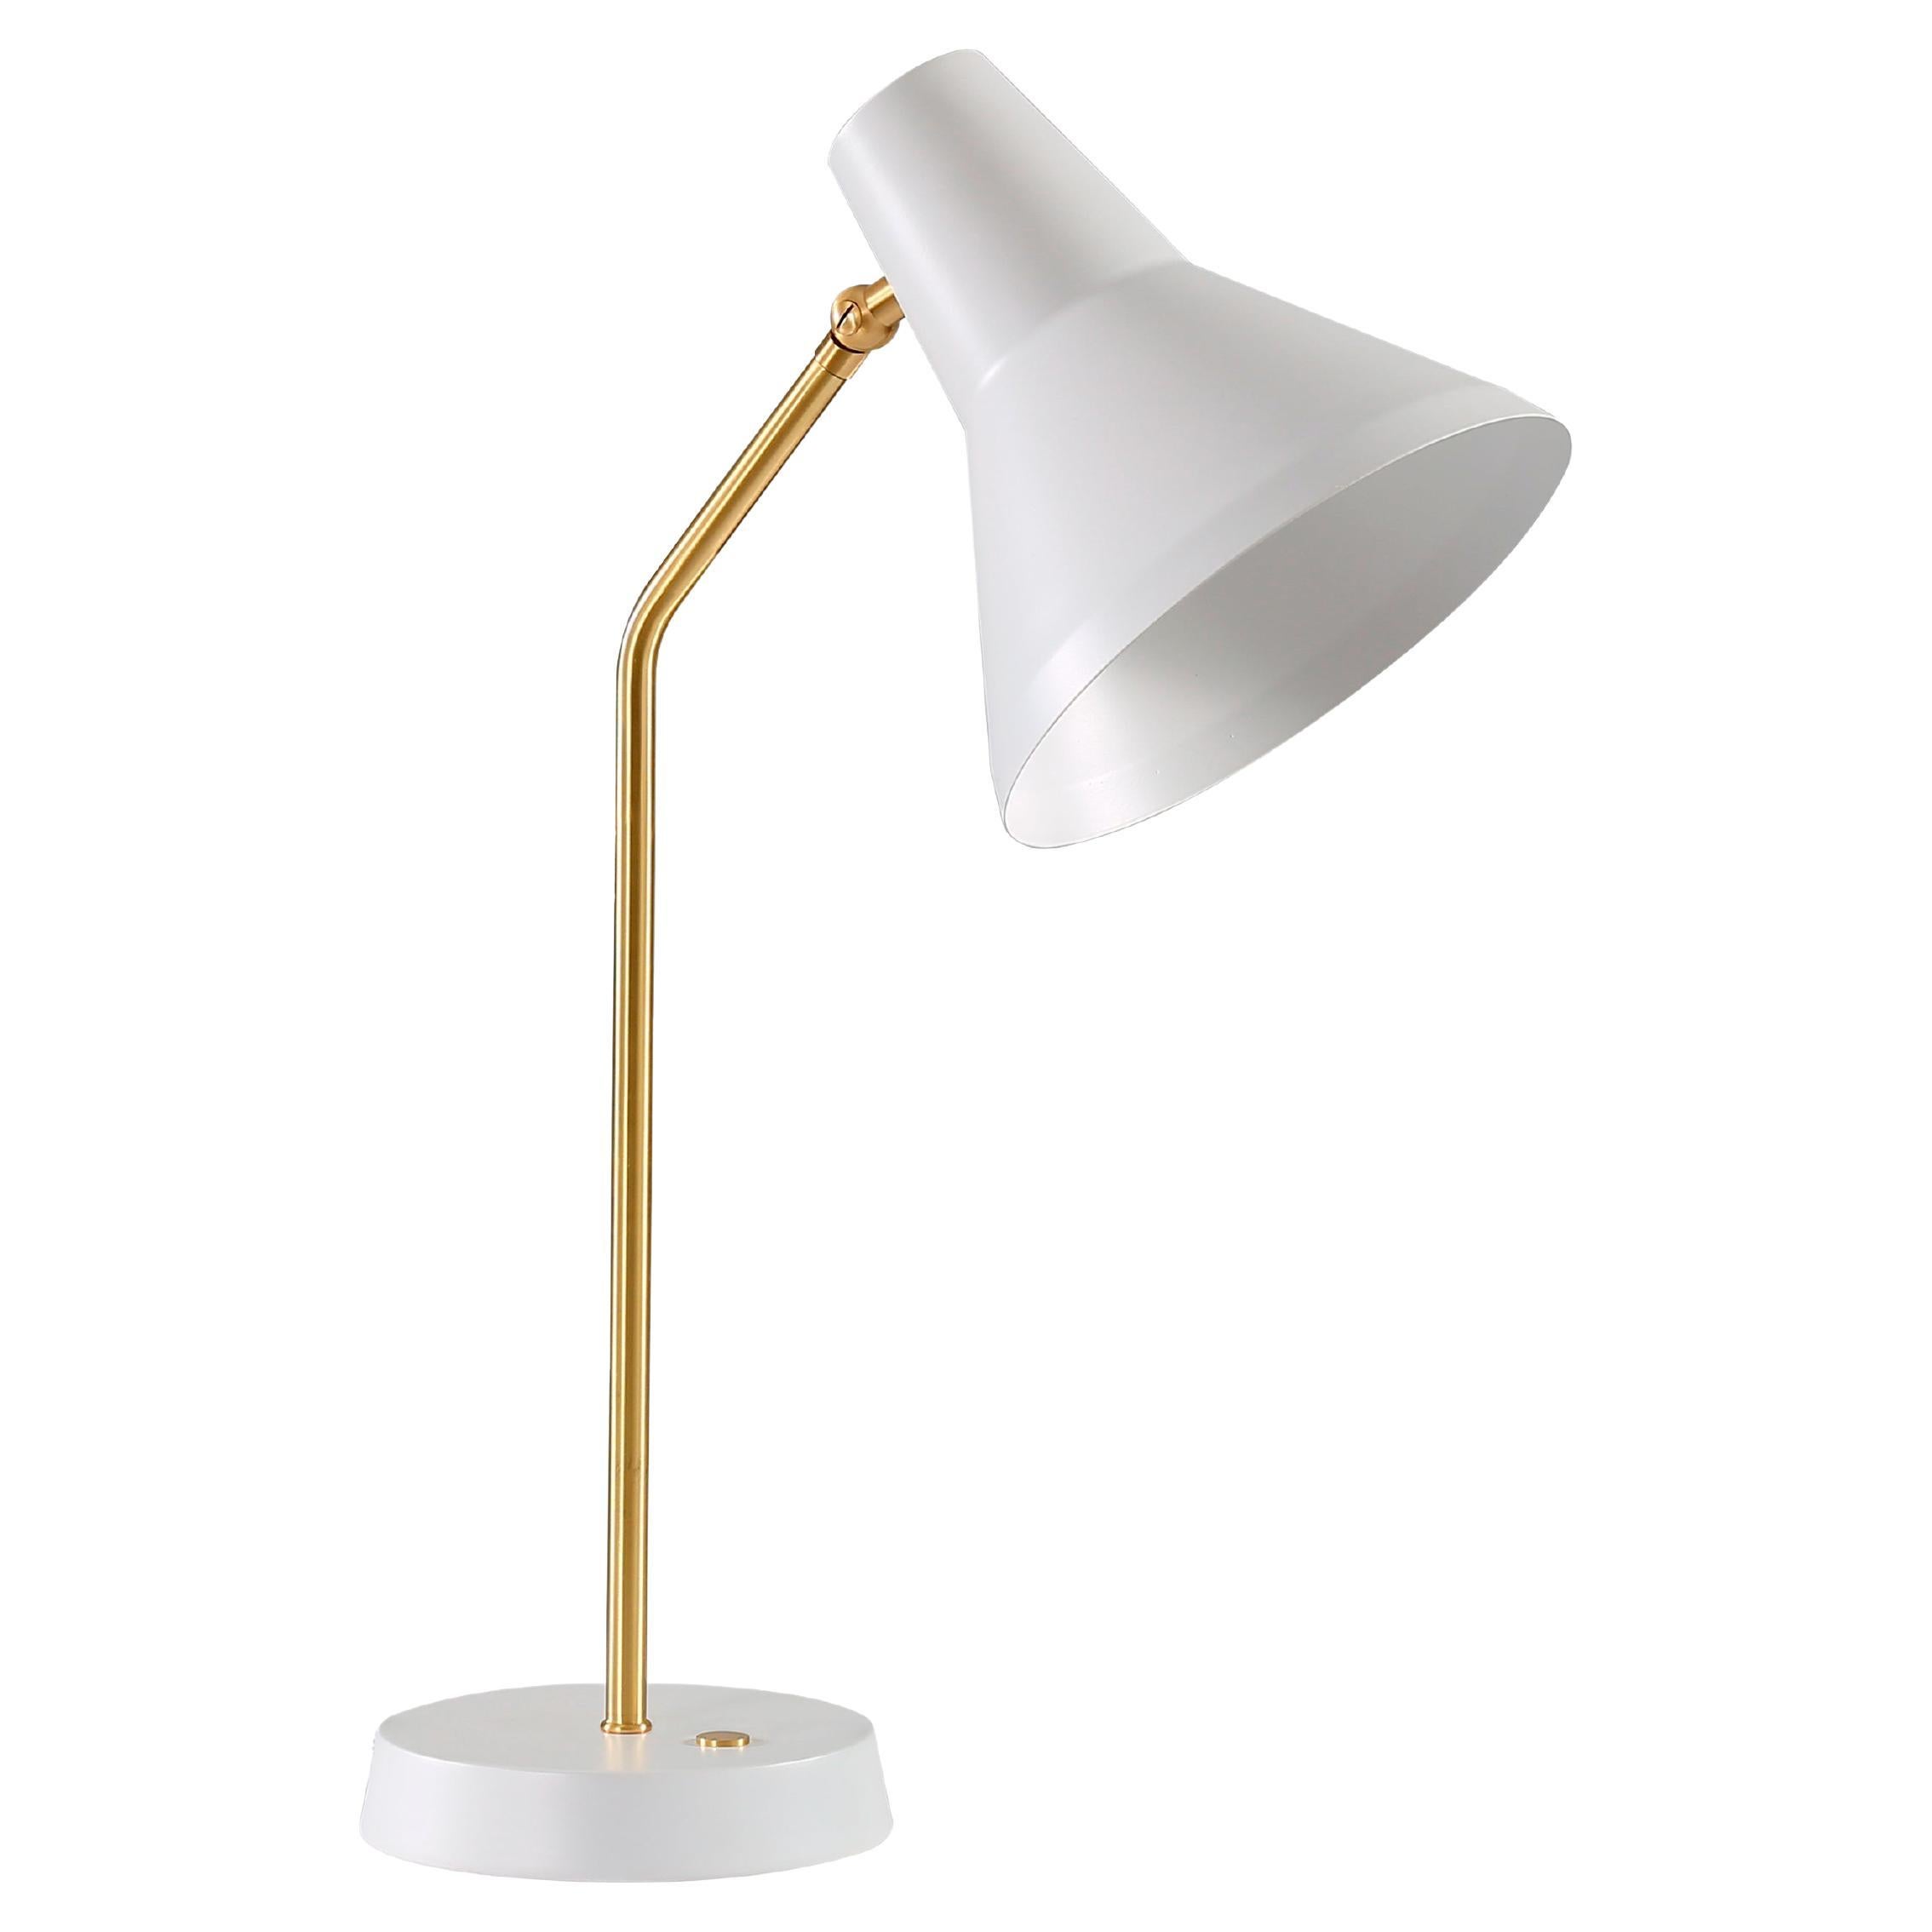 Contemporary Lisa Johansson-Pape 'Carin' Table Lamp in Polished Chrome for Innolux